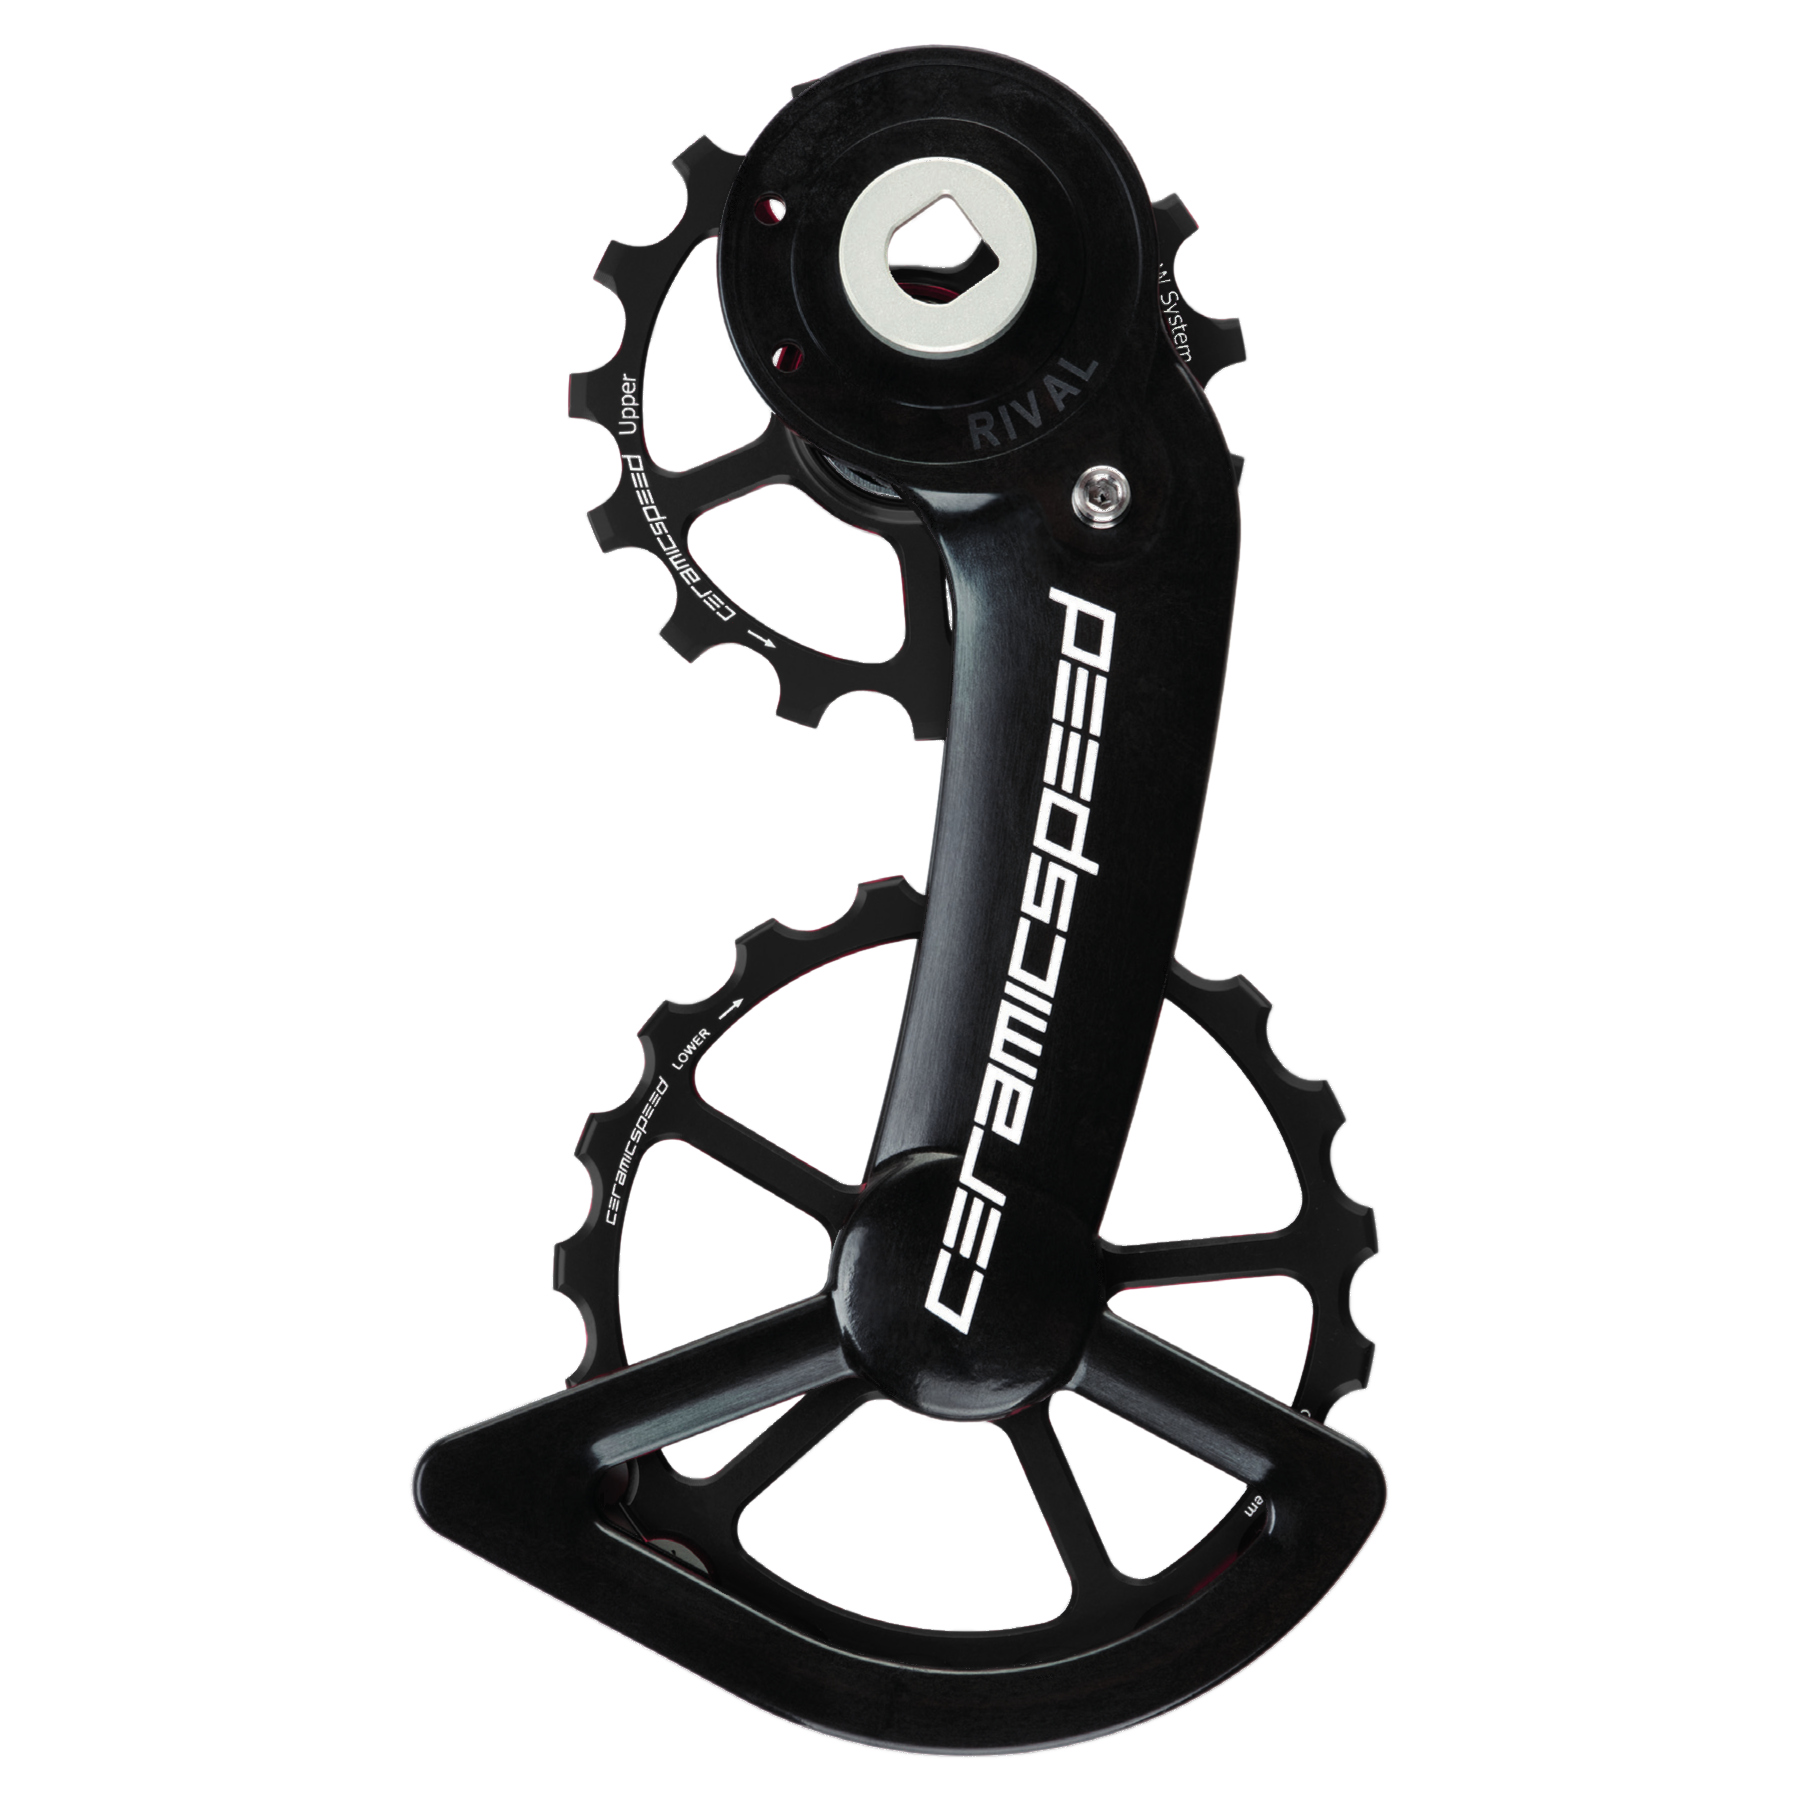 Image of CeramicSpeed OSPW Derailleur Pulley System - for SRAM Rival AXS | 15/19 Teeth - Alternative Black